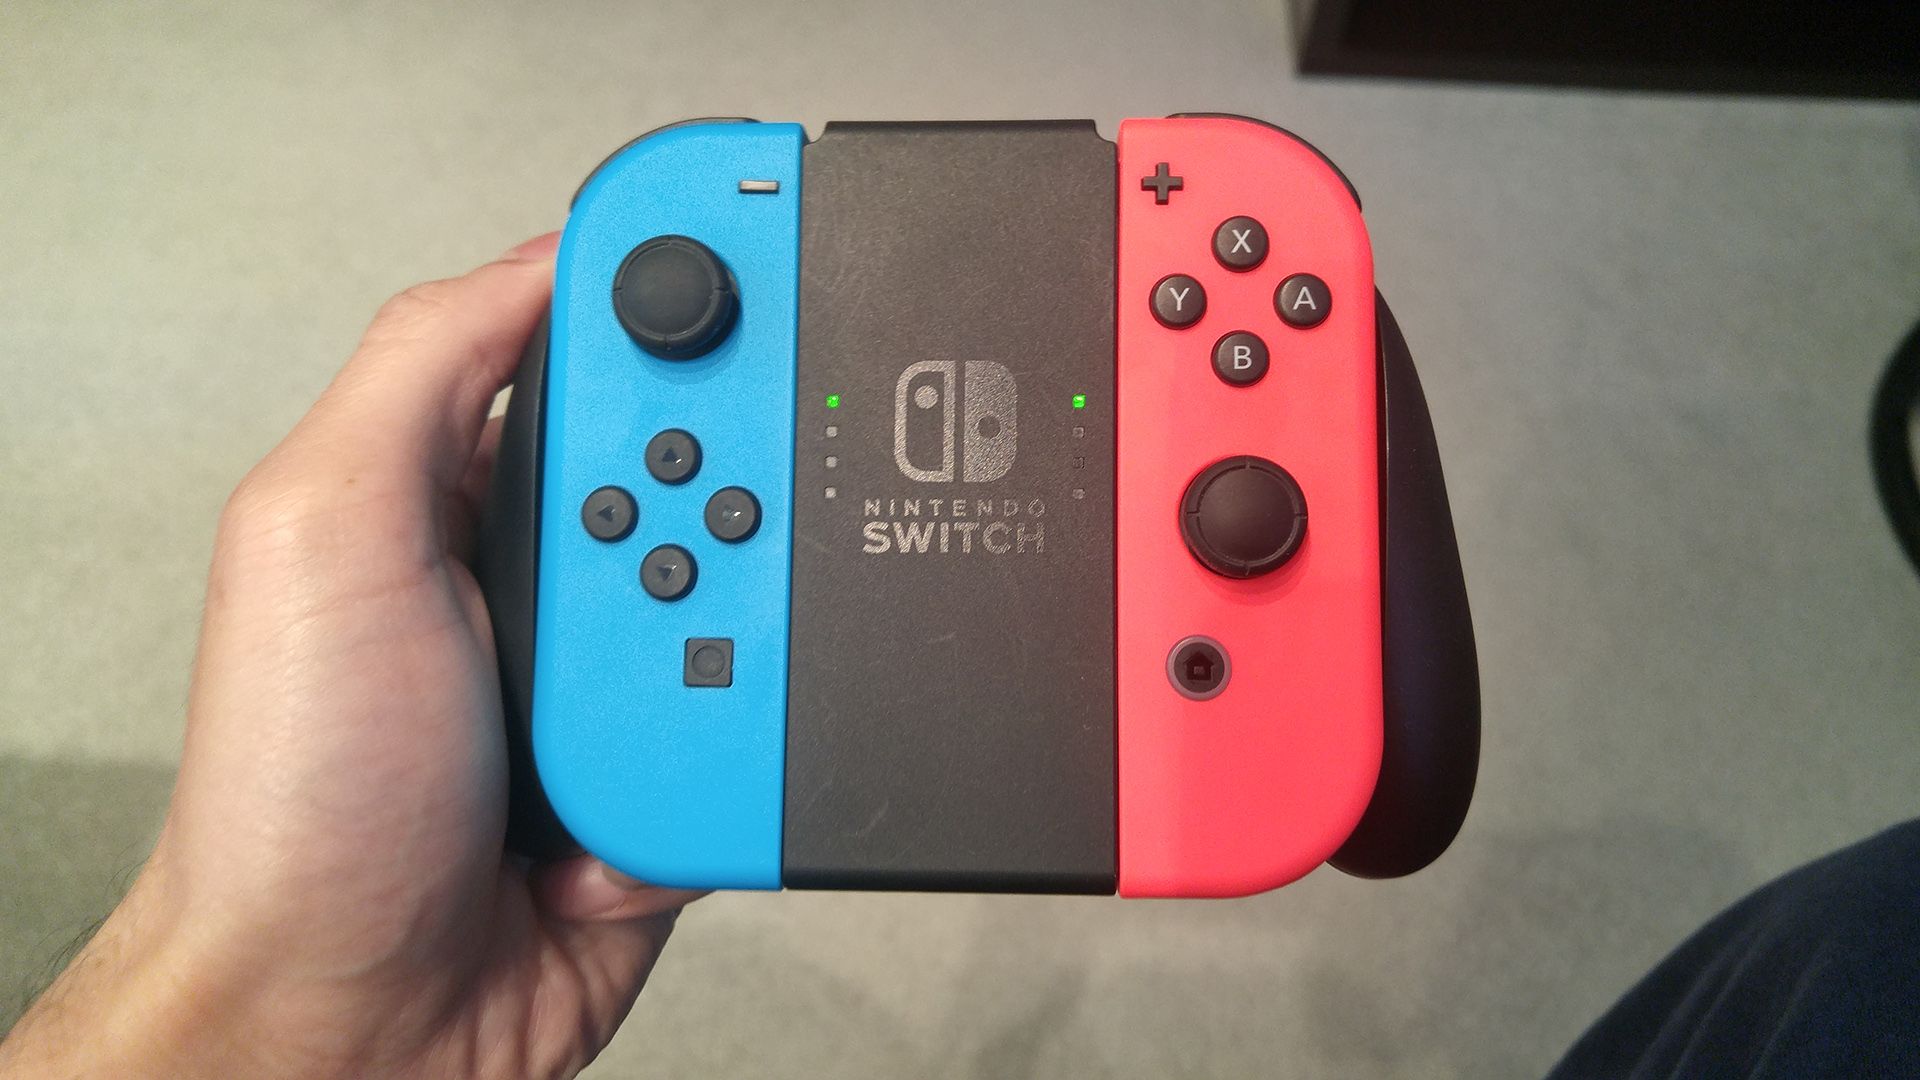 Two Joy-Cons inserted into a Joy-Con grip.